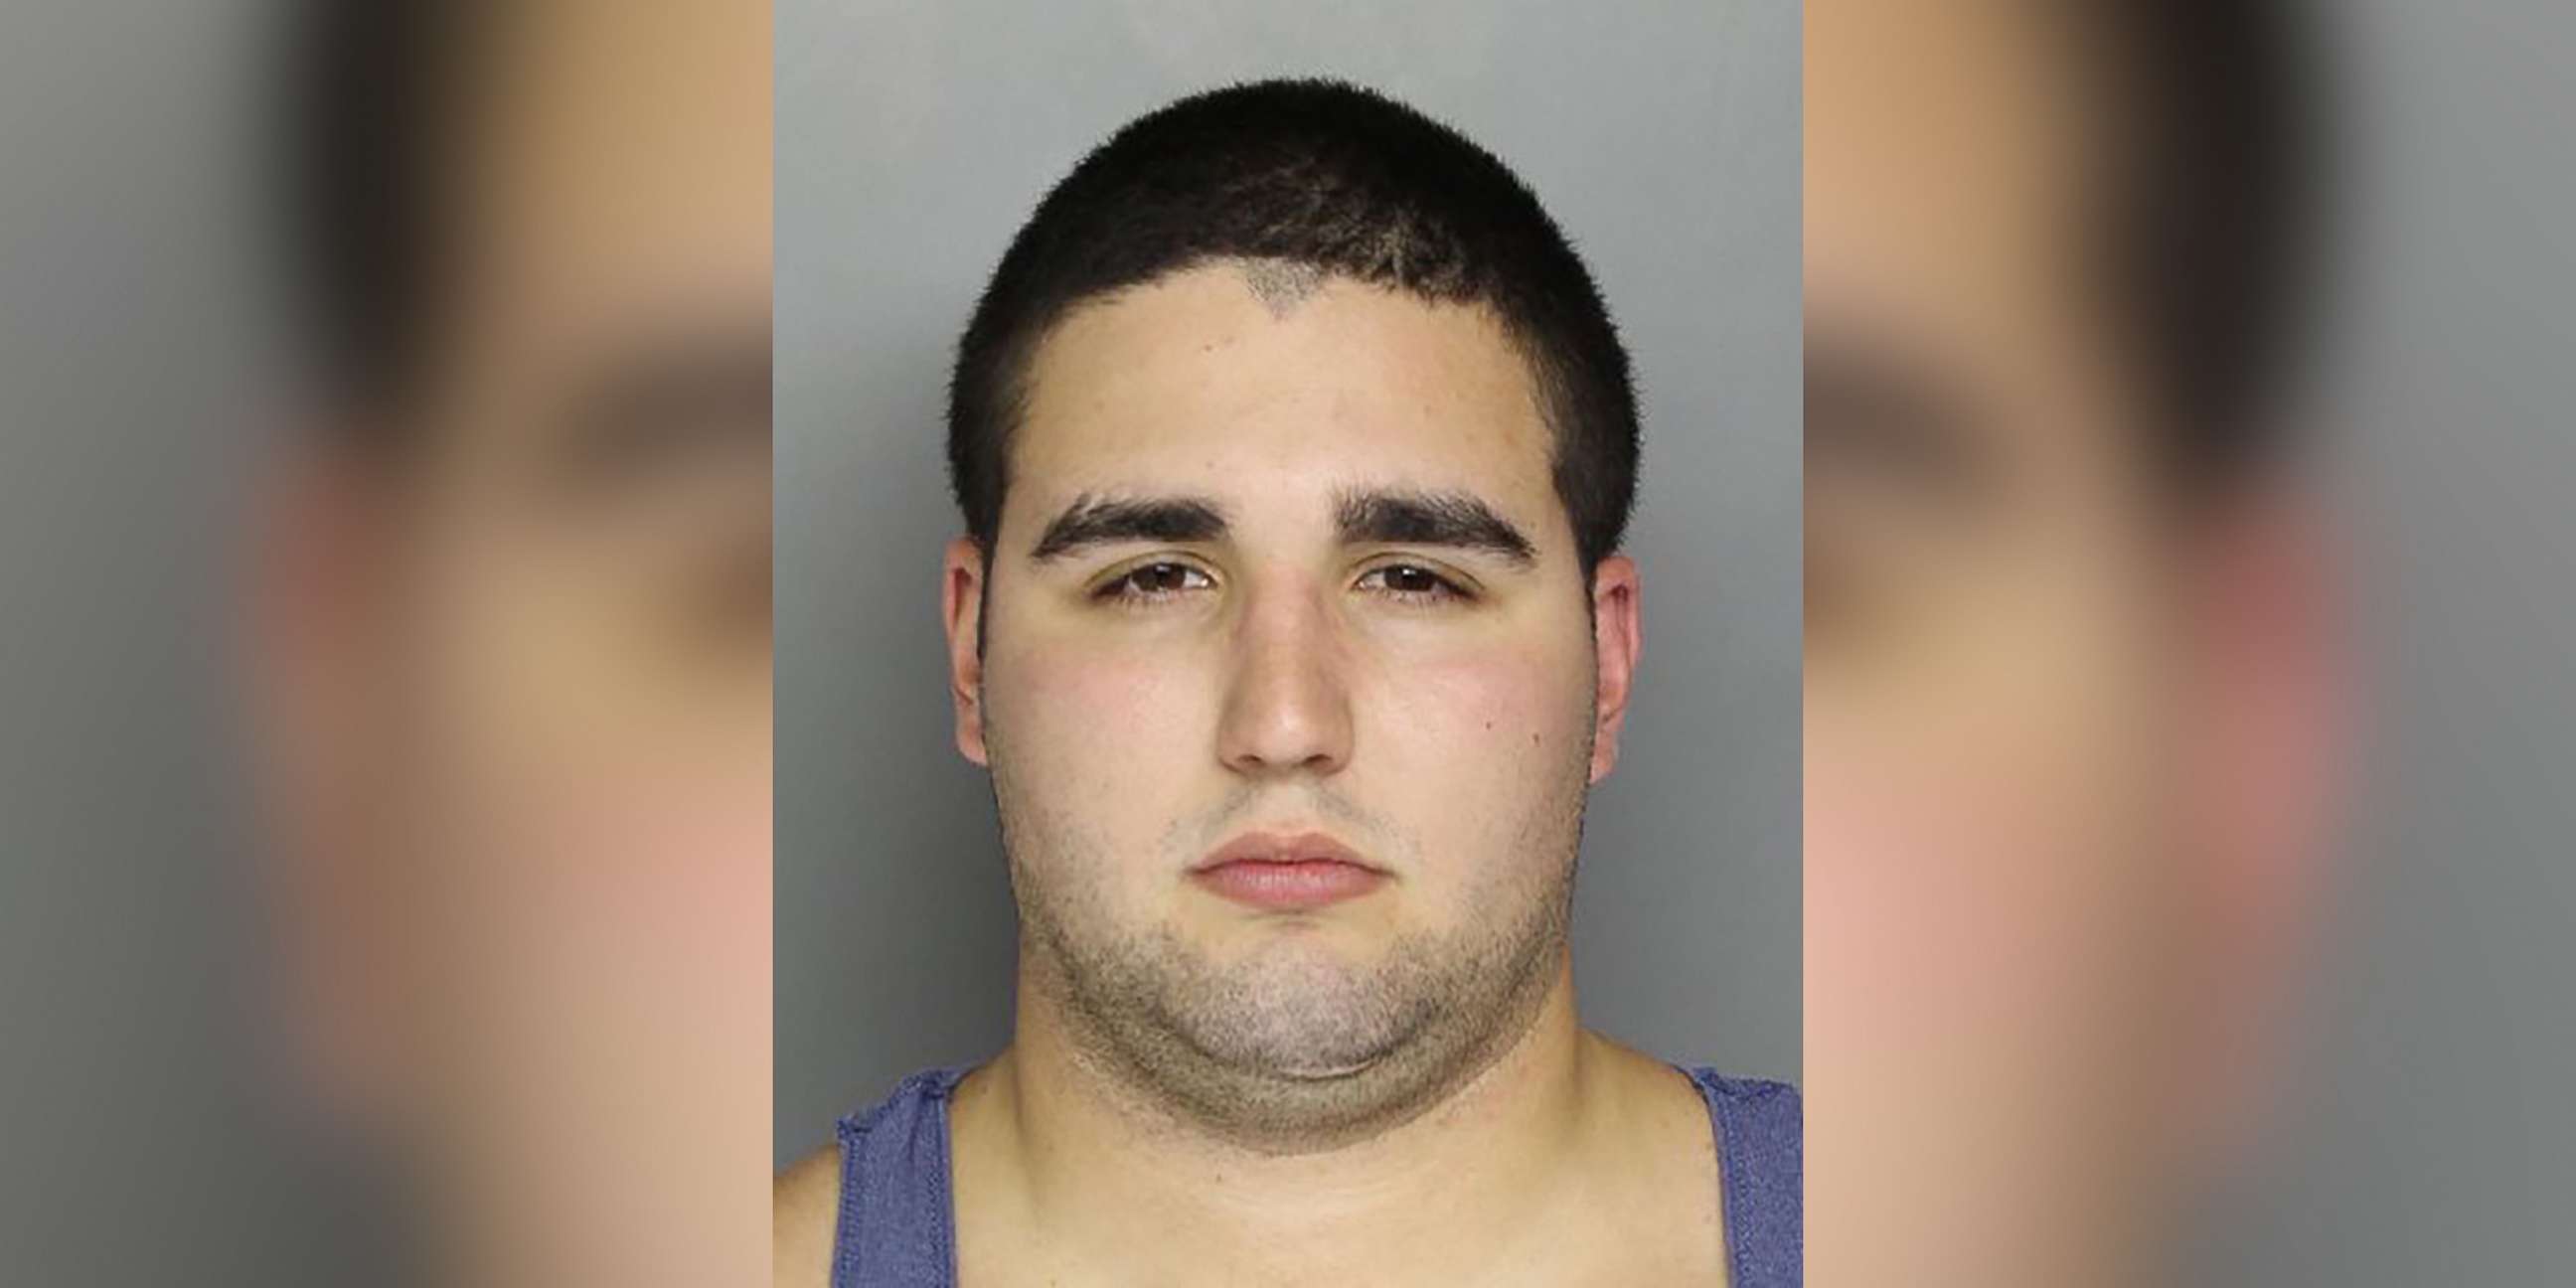 PHOTO: An undated handout photo made available by the Bucks County District Attorney's Office showing Cosmo Dinardo, 20, of Bucks County, Pa.